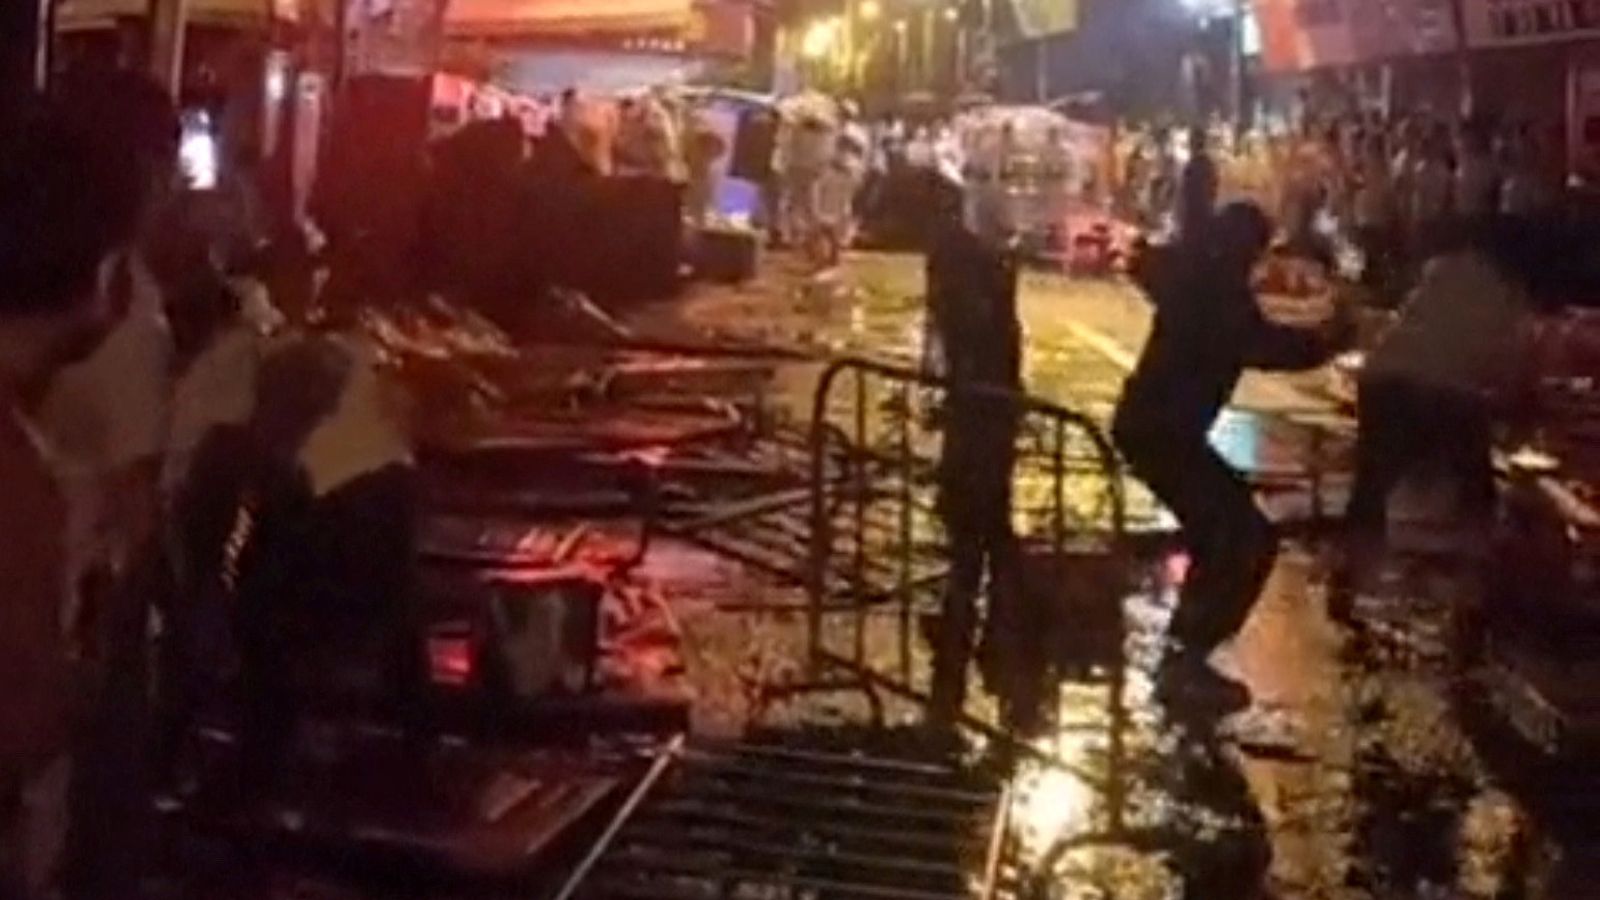 Crowds in major Chinese city Guangzhou clash with riot police in hazmat suits over zero-COVID policy